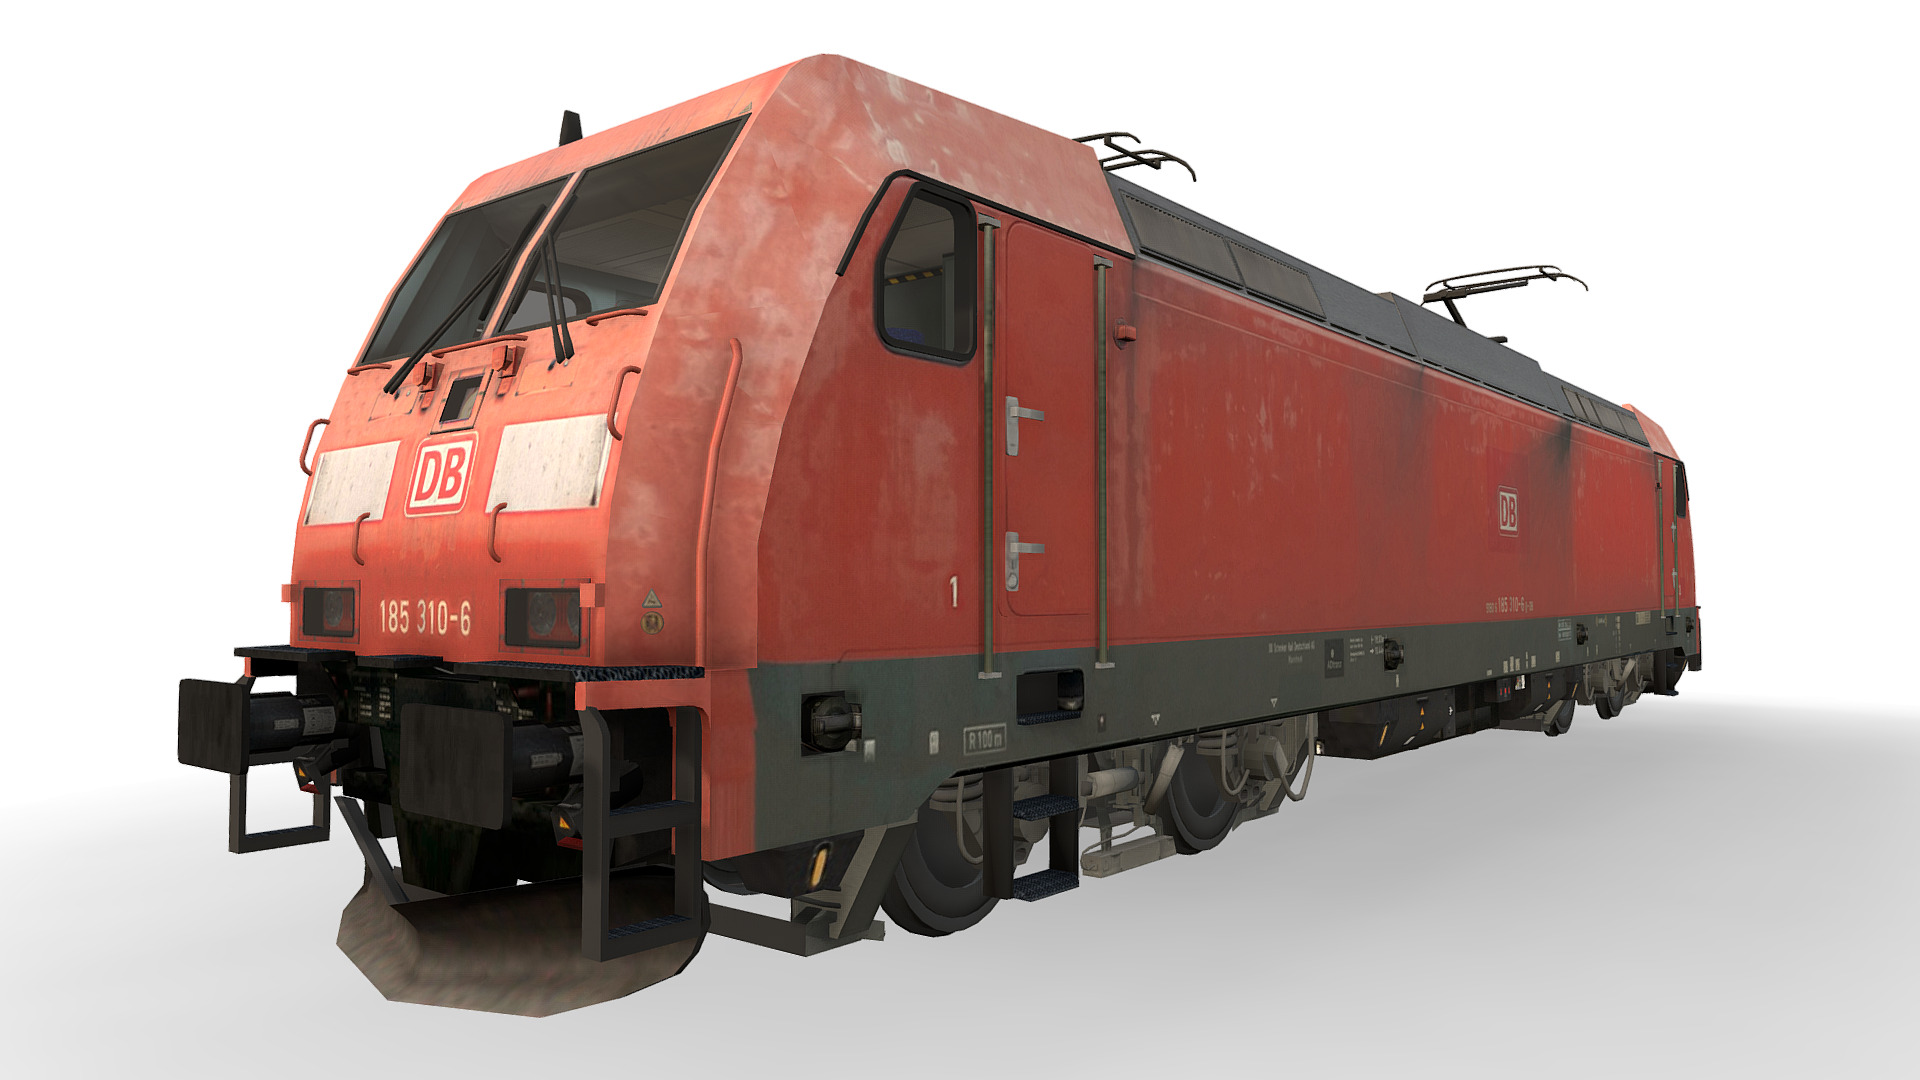 3D model Locomotive Class 185 310-6 – DB Cargo - This is a 3D model of the Locomotive Class 185 310-6 - DB Cargo. The 3D model is about a red train car.